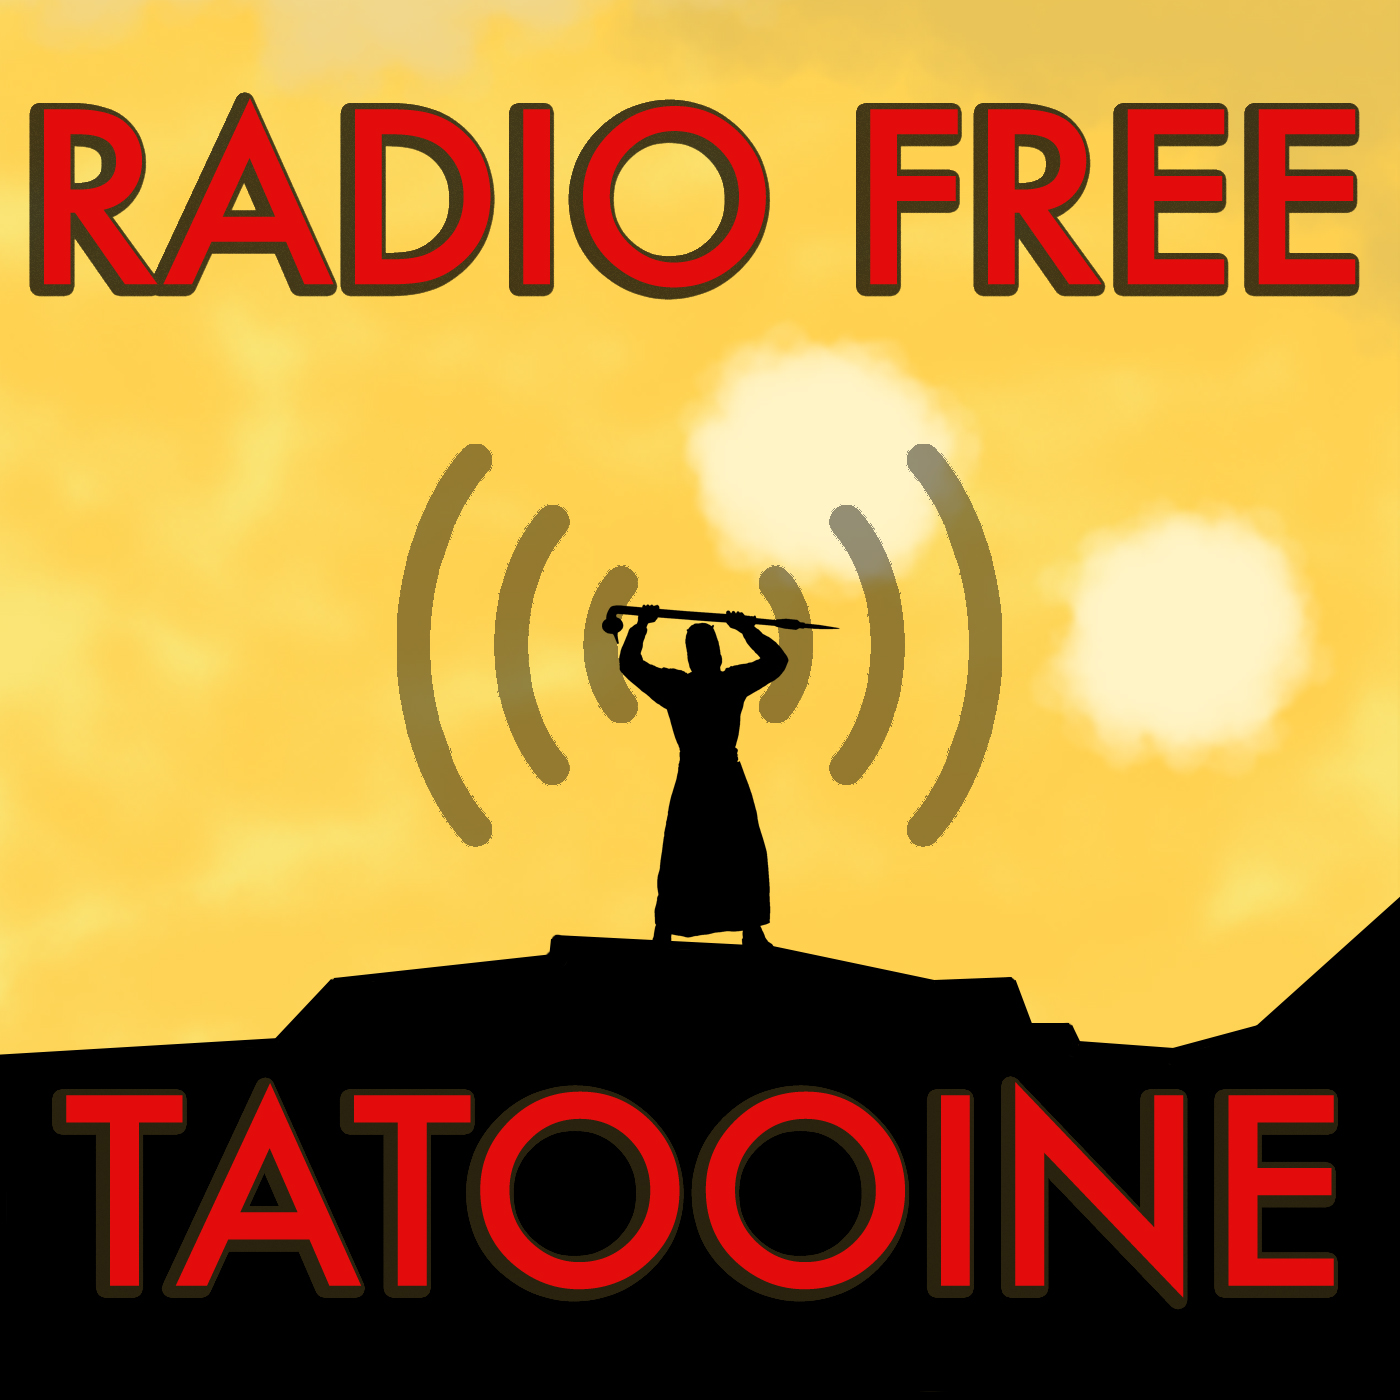 Radio Free Tatooine: A Star Wars podcast that's better than some, worse than others... artwork